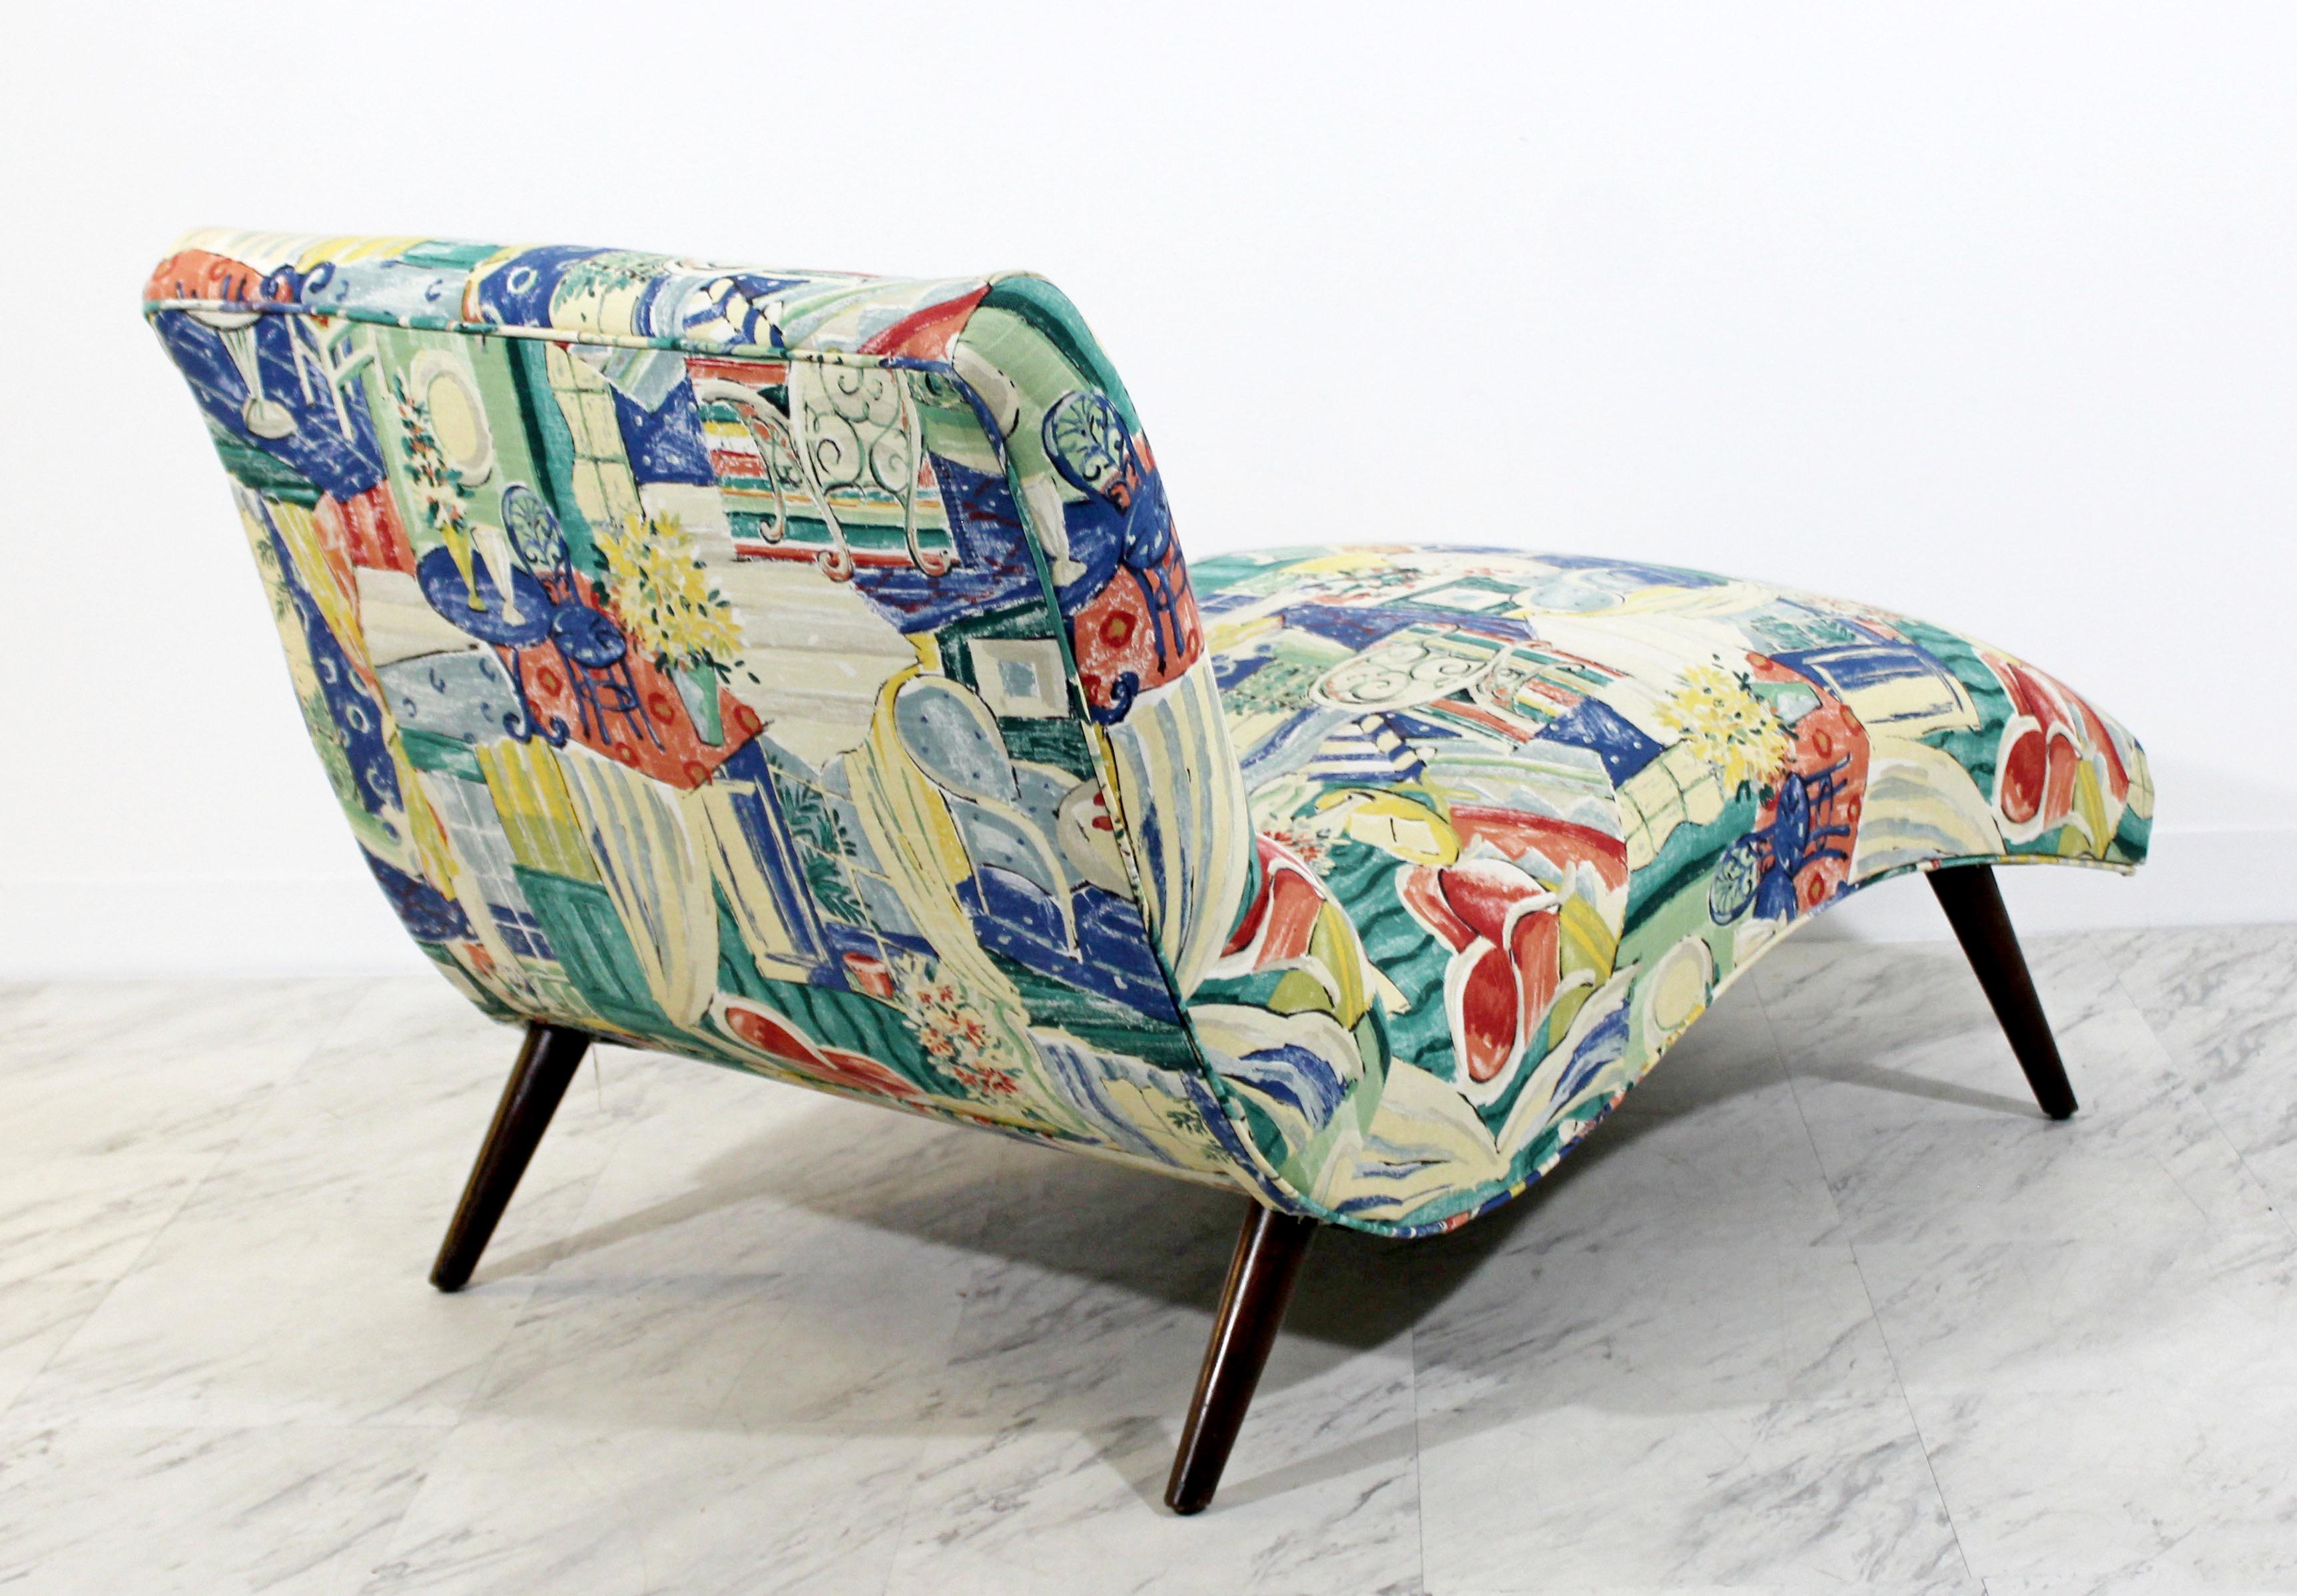 American Mid-Century Modern Contour Wave Chaise Lounge Chair by Adrian Pearsall, 1950s